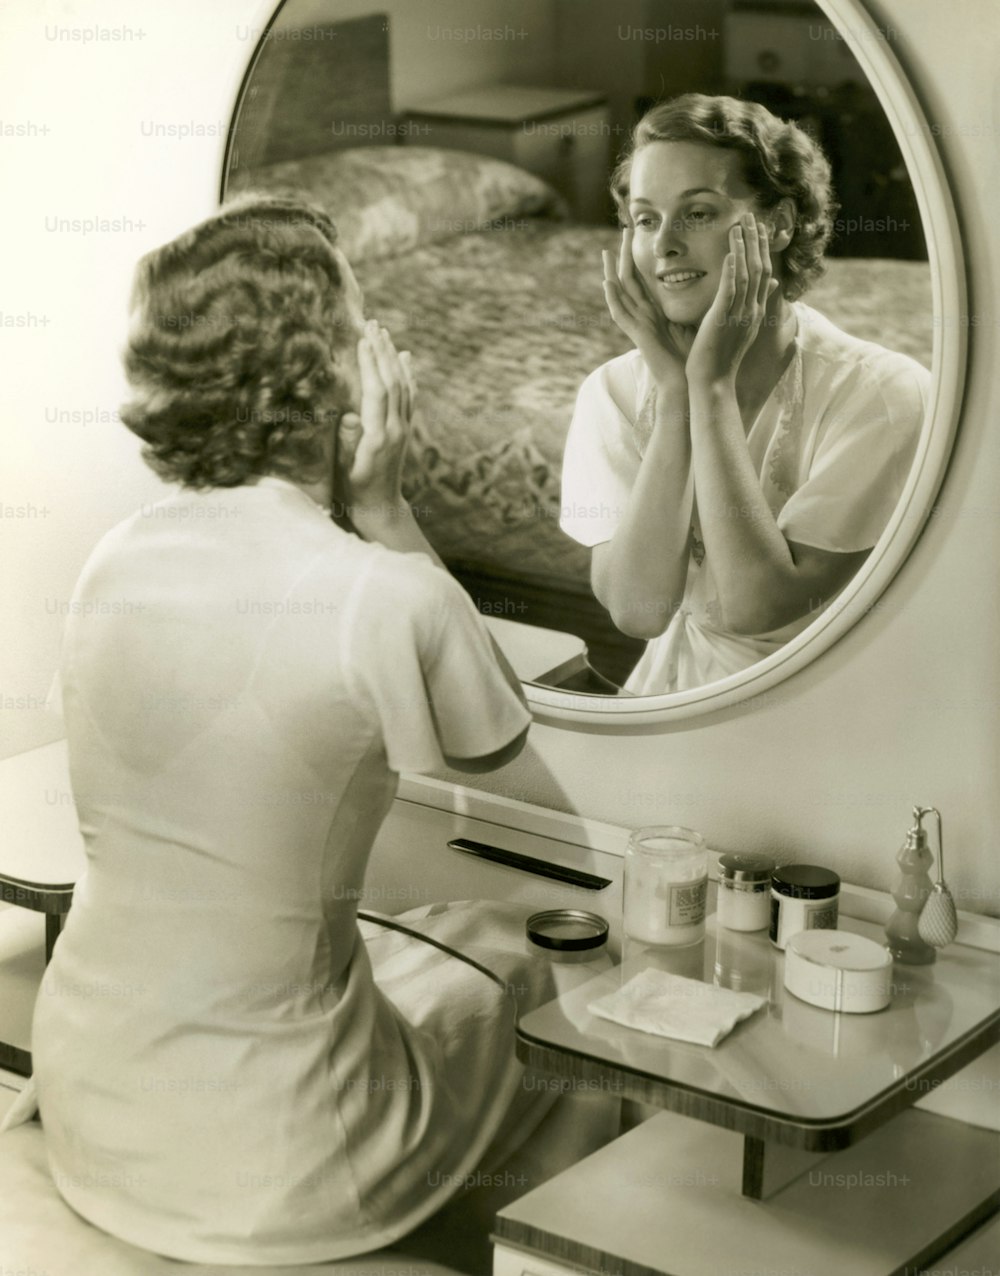 UNITED STATES - CIRCA 1950s:  Woman looking in the mirror and touching her face.